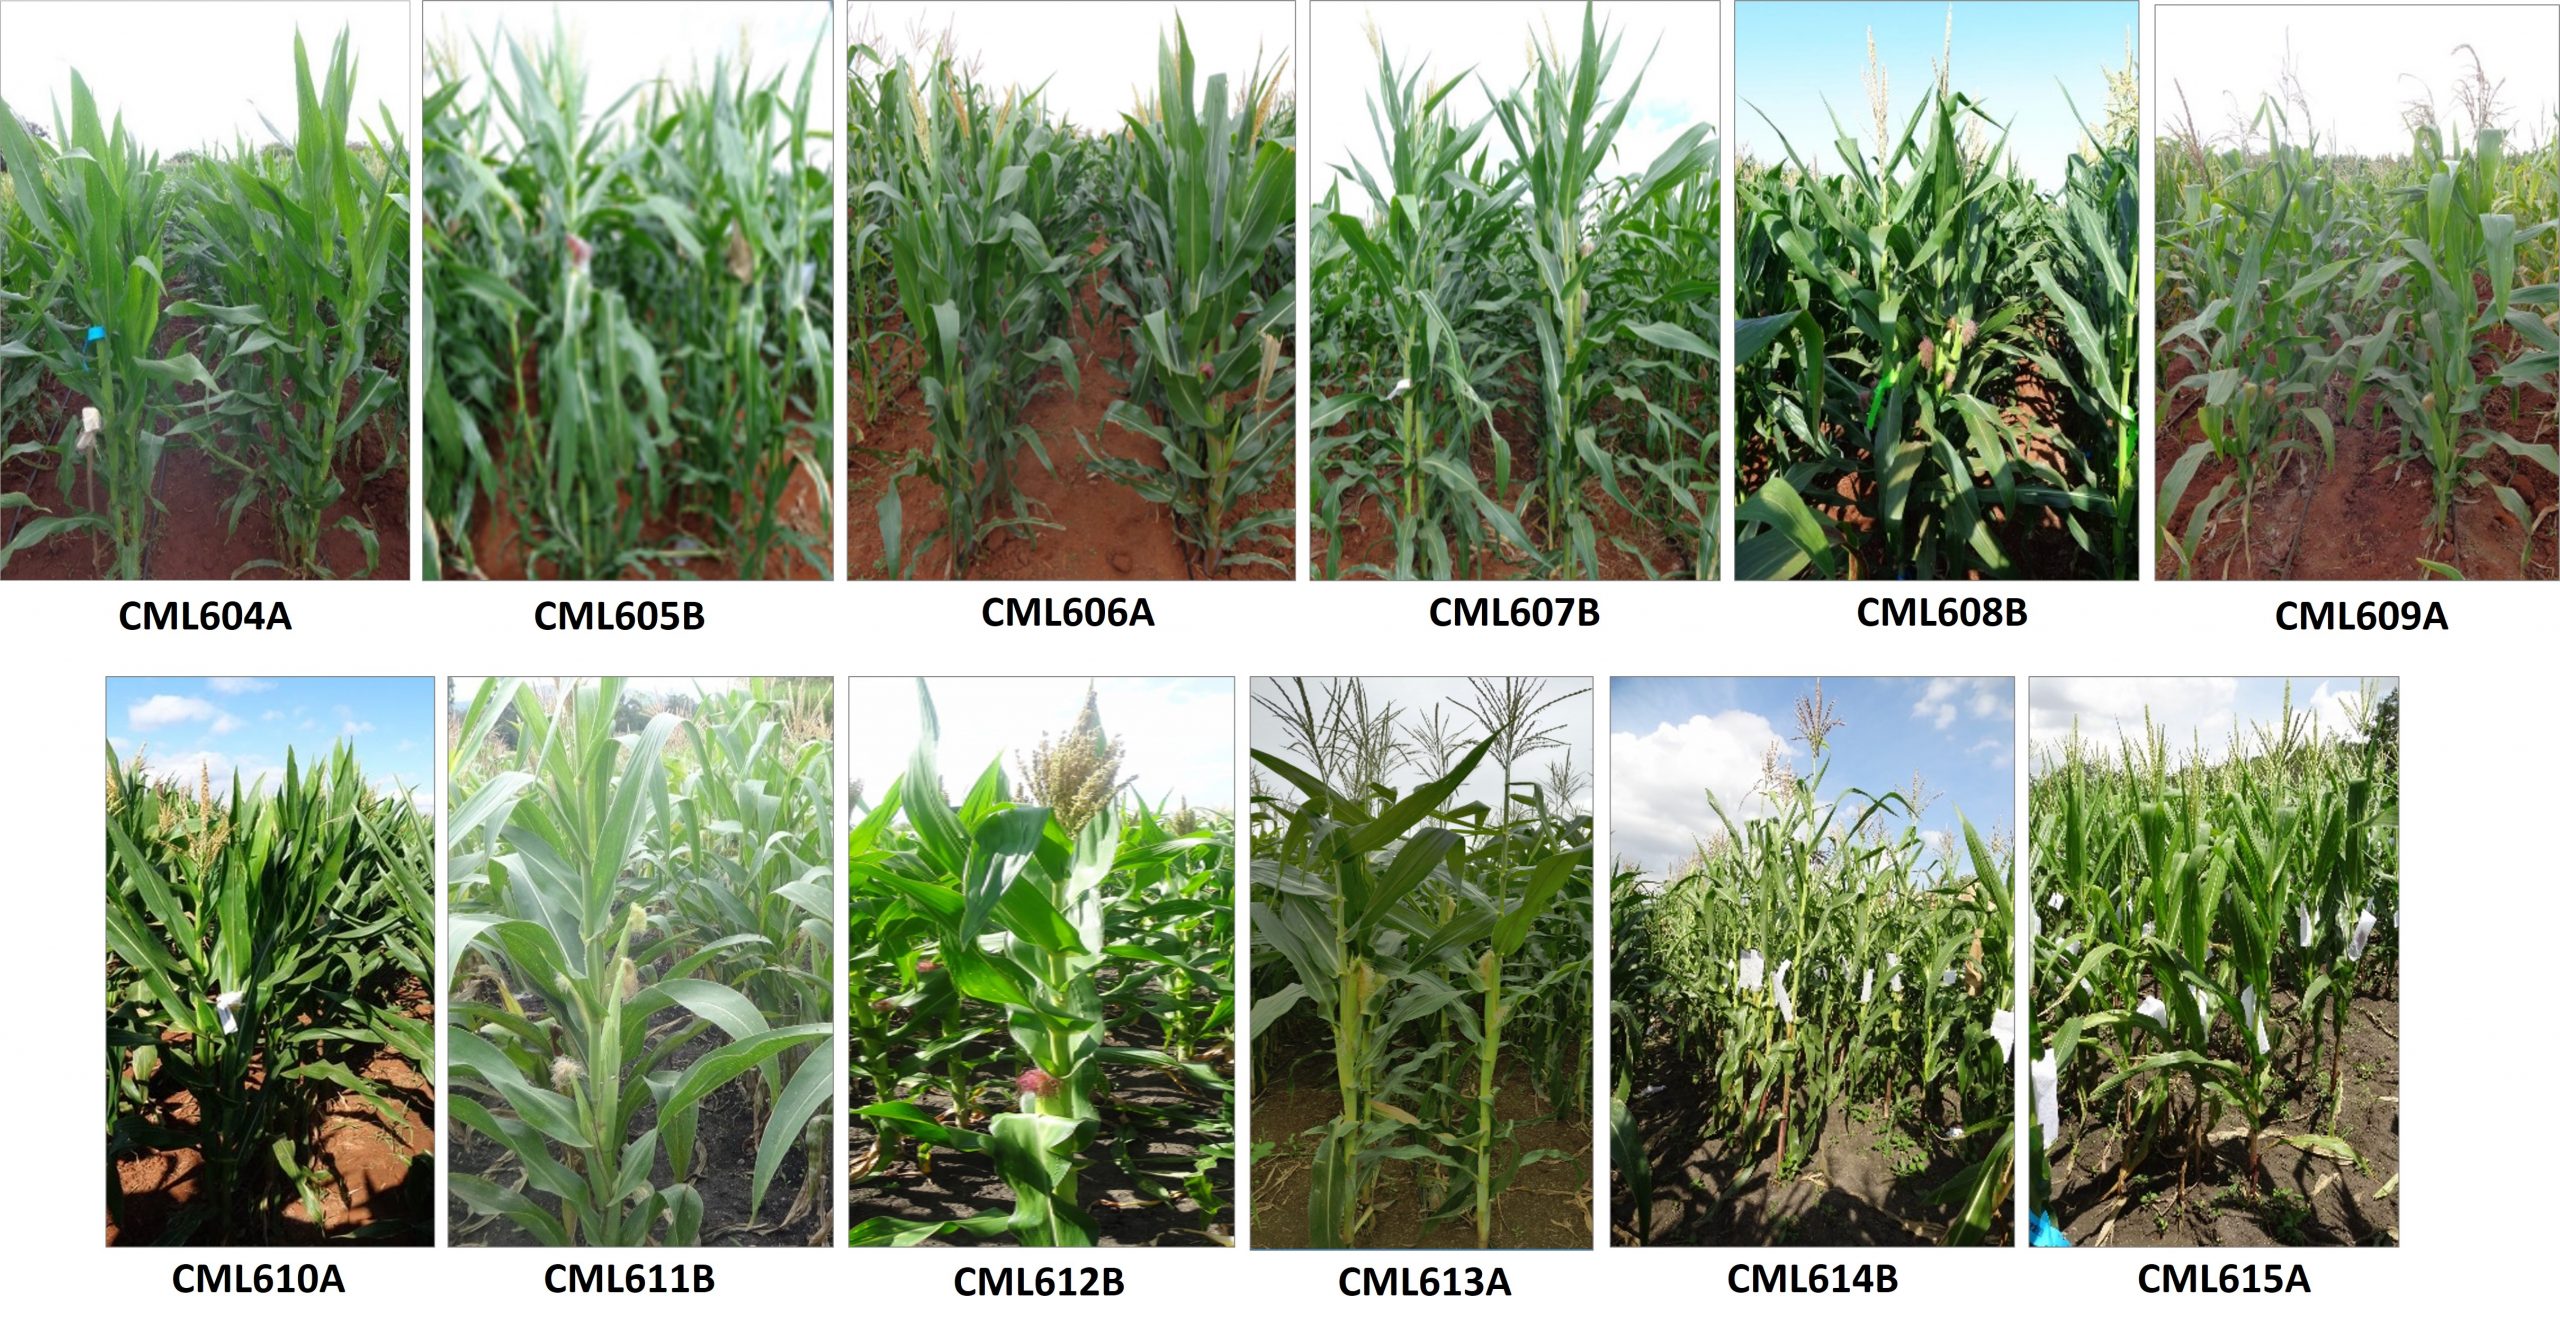 Plants of the newly released set of CIMMYT maize lines. (Photo: CIMMYT)